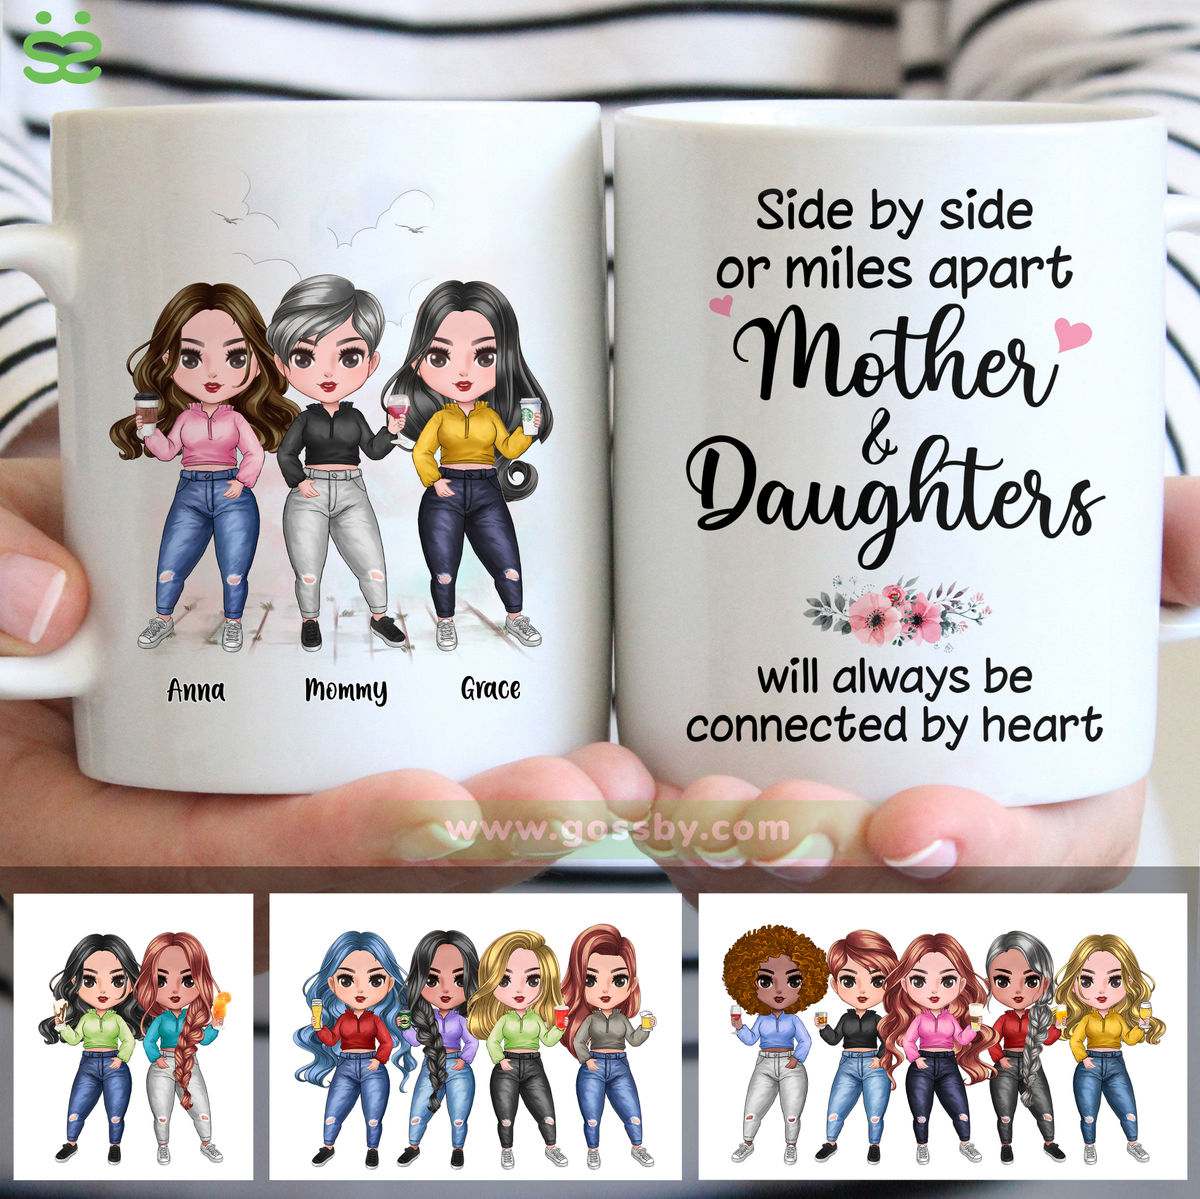 Mother & Daughters - Side By Side Or Miles Apart, Mother & Daughters Will Always Be Connected By Heart (6442) - Personalized Mug